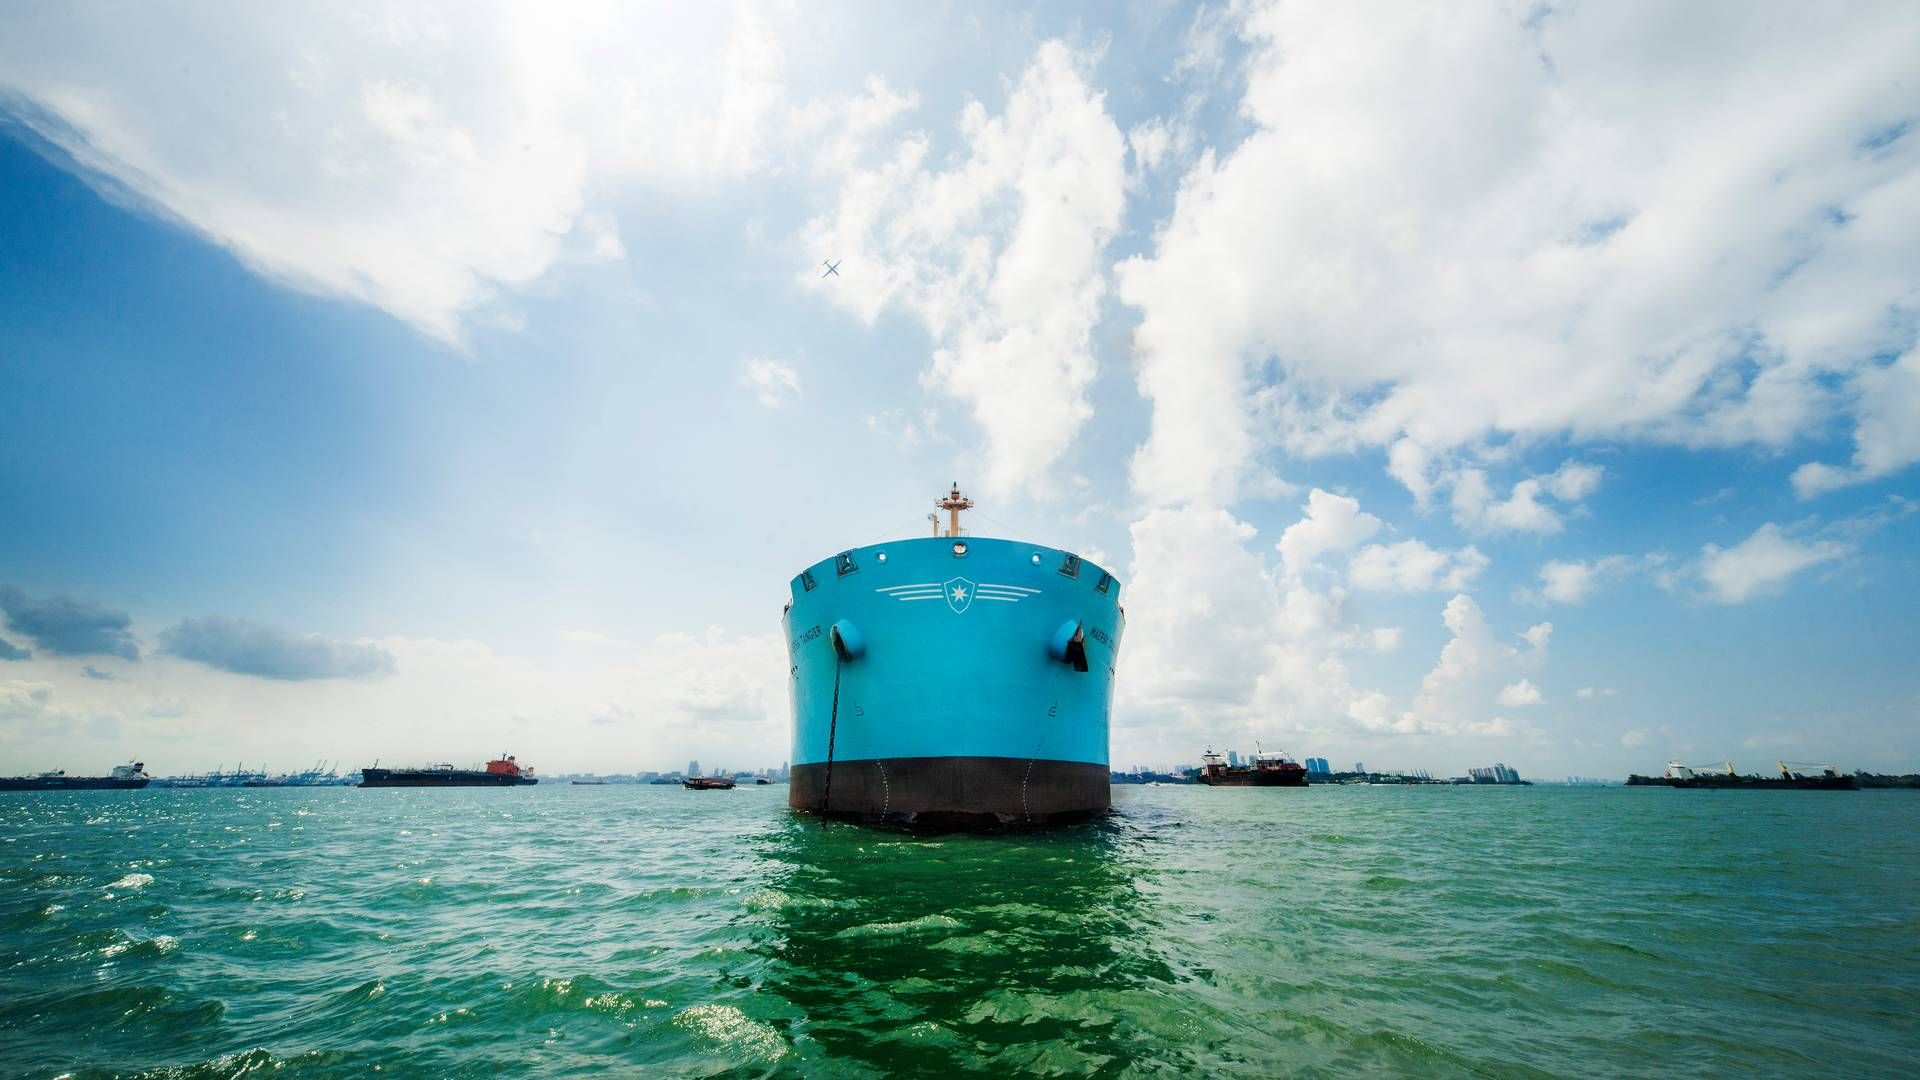 Archival image. Shows a Maersk Tankers vessel, but not Maersk Magellan. | Photo: Pr / Maersk Tankers